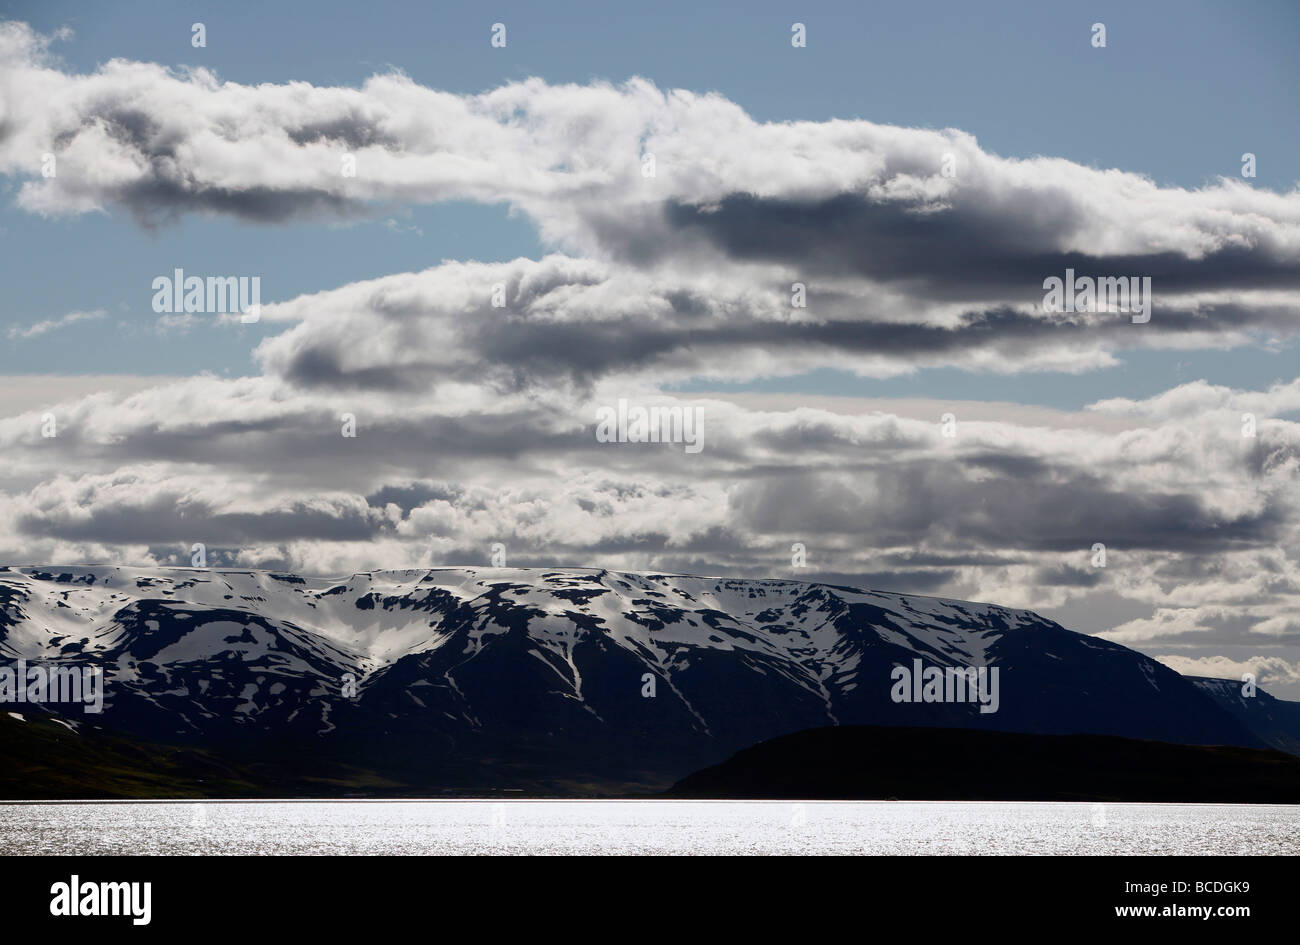 A view of snow capped mountains from the ferry to Grímsey Island, Iceland Stock Photo